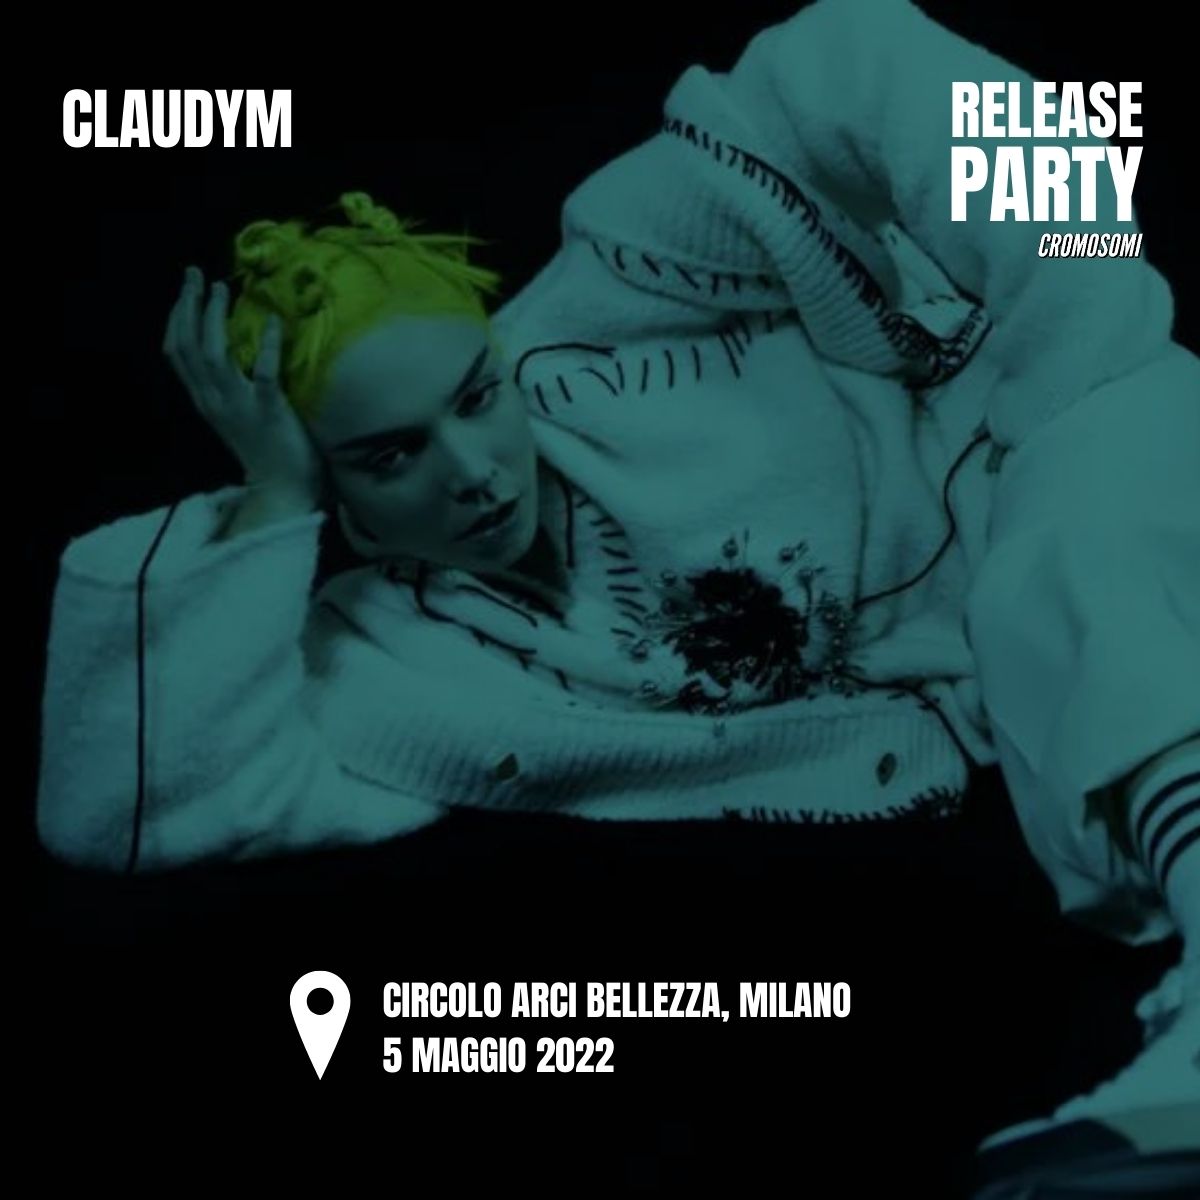 Grazie a Claudym, UN-POPULAR is the new cool